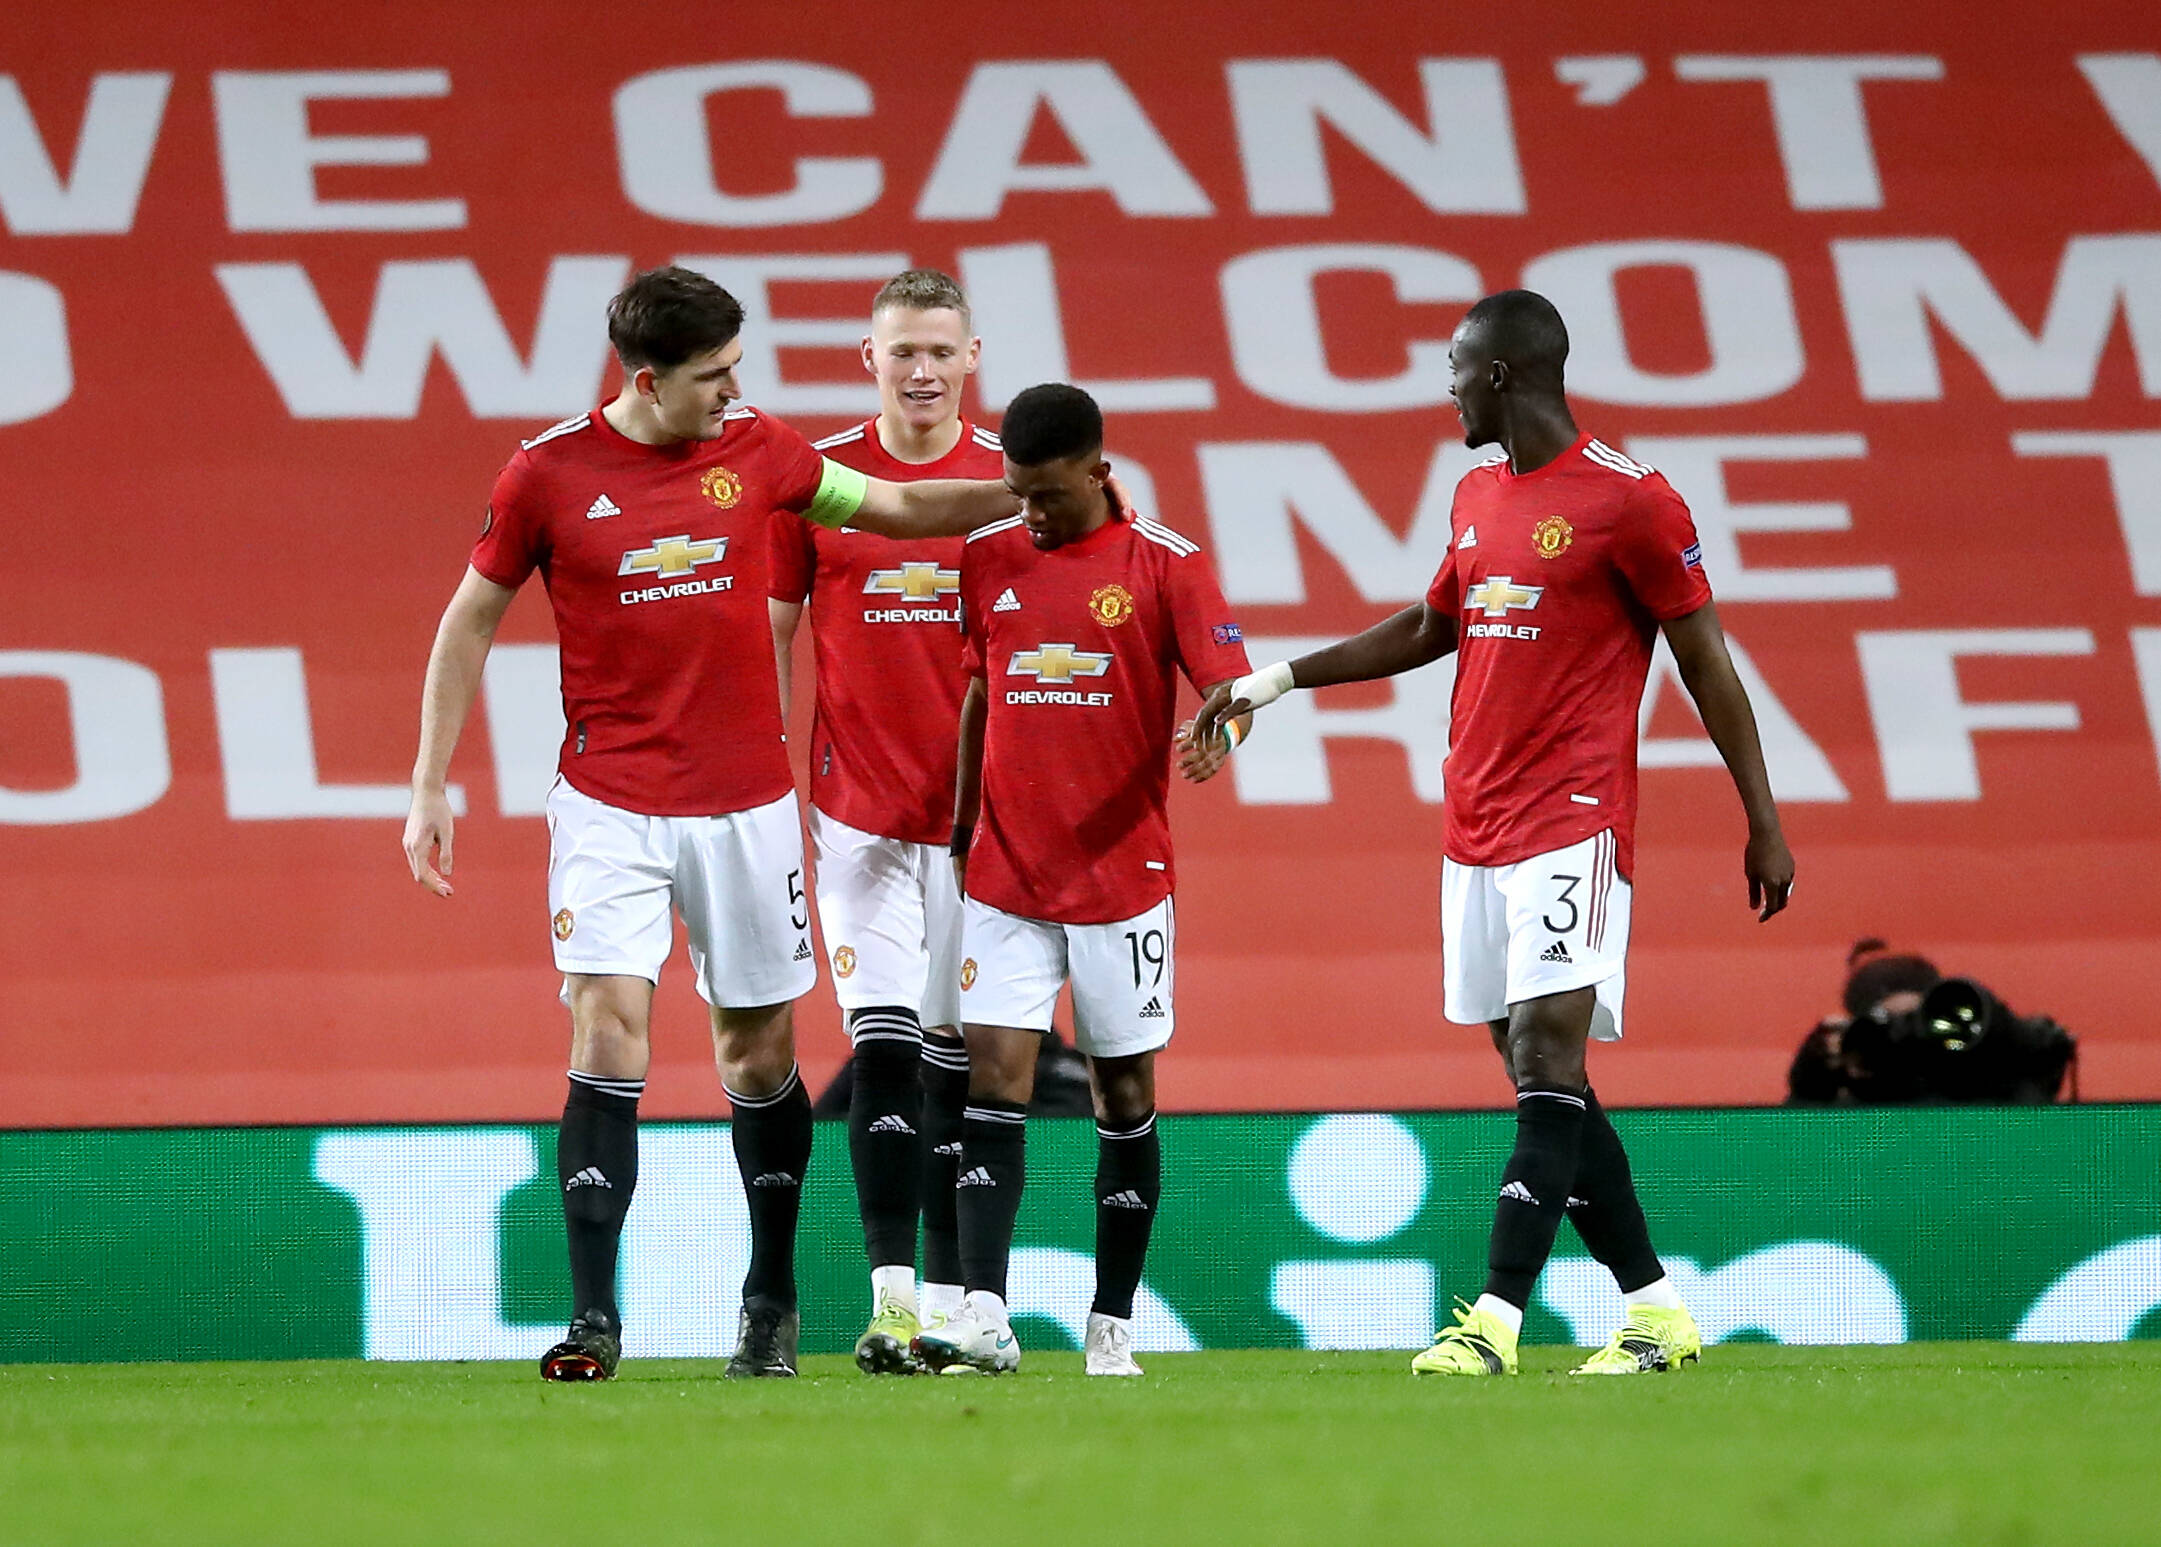 Manchester United against AC Milan in the UEFA Europa League.